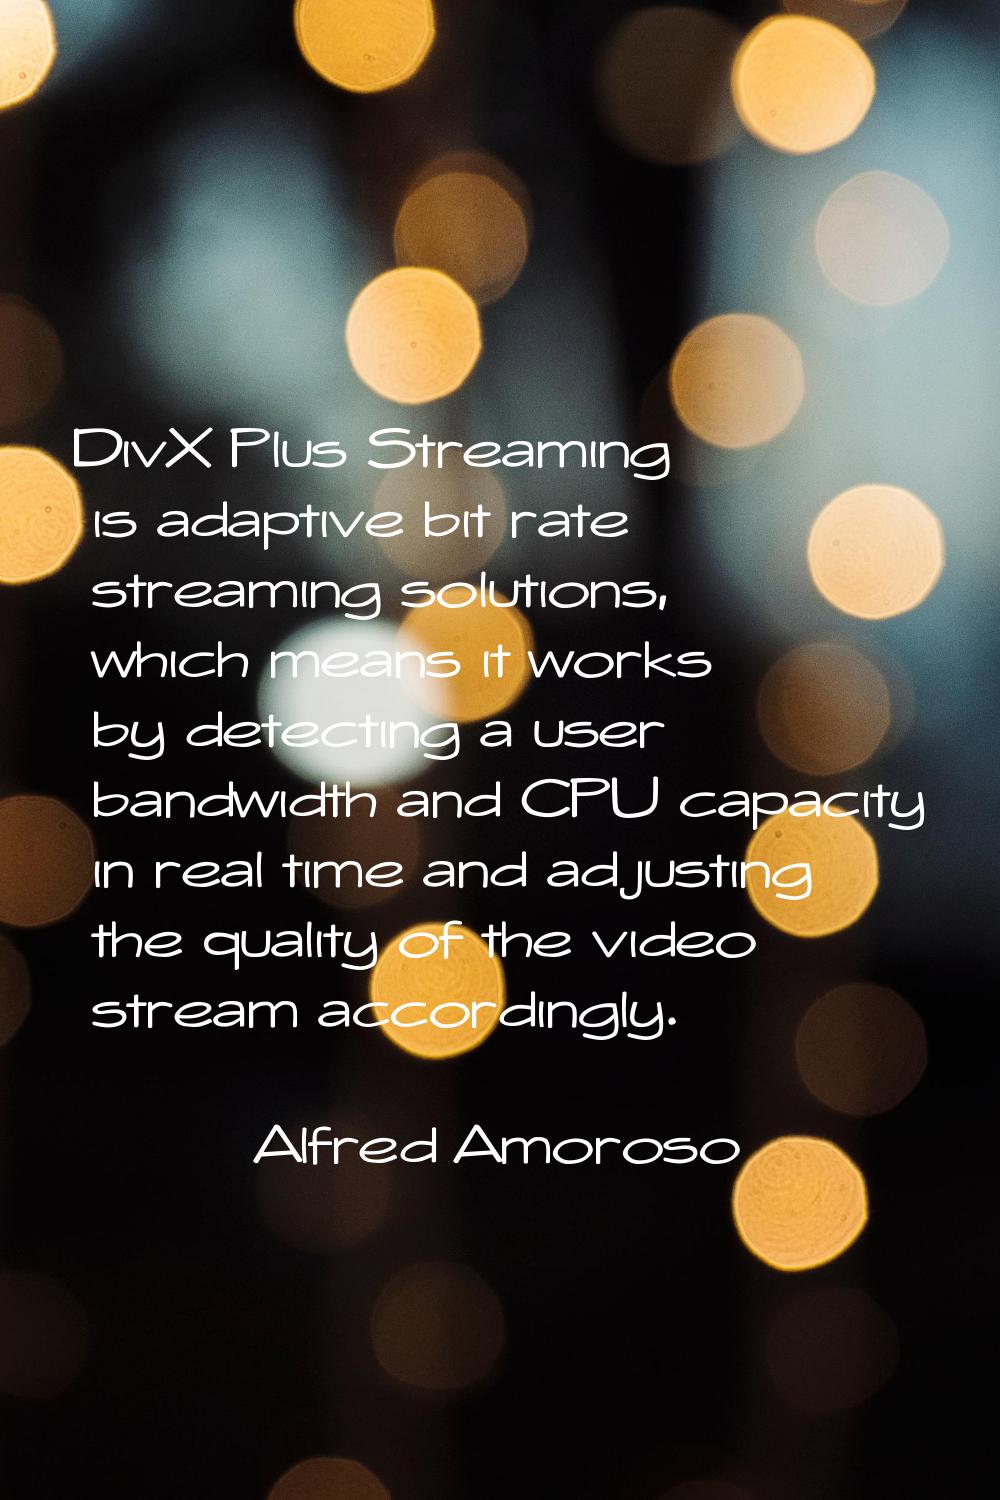 DivX Plus Streaming is adaptive bit rate streaming solutions, which means it works by detecting a u